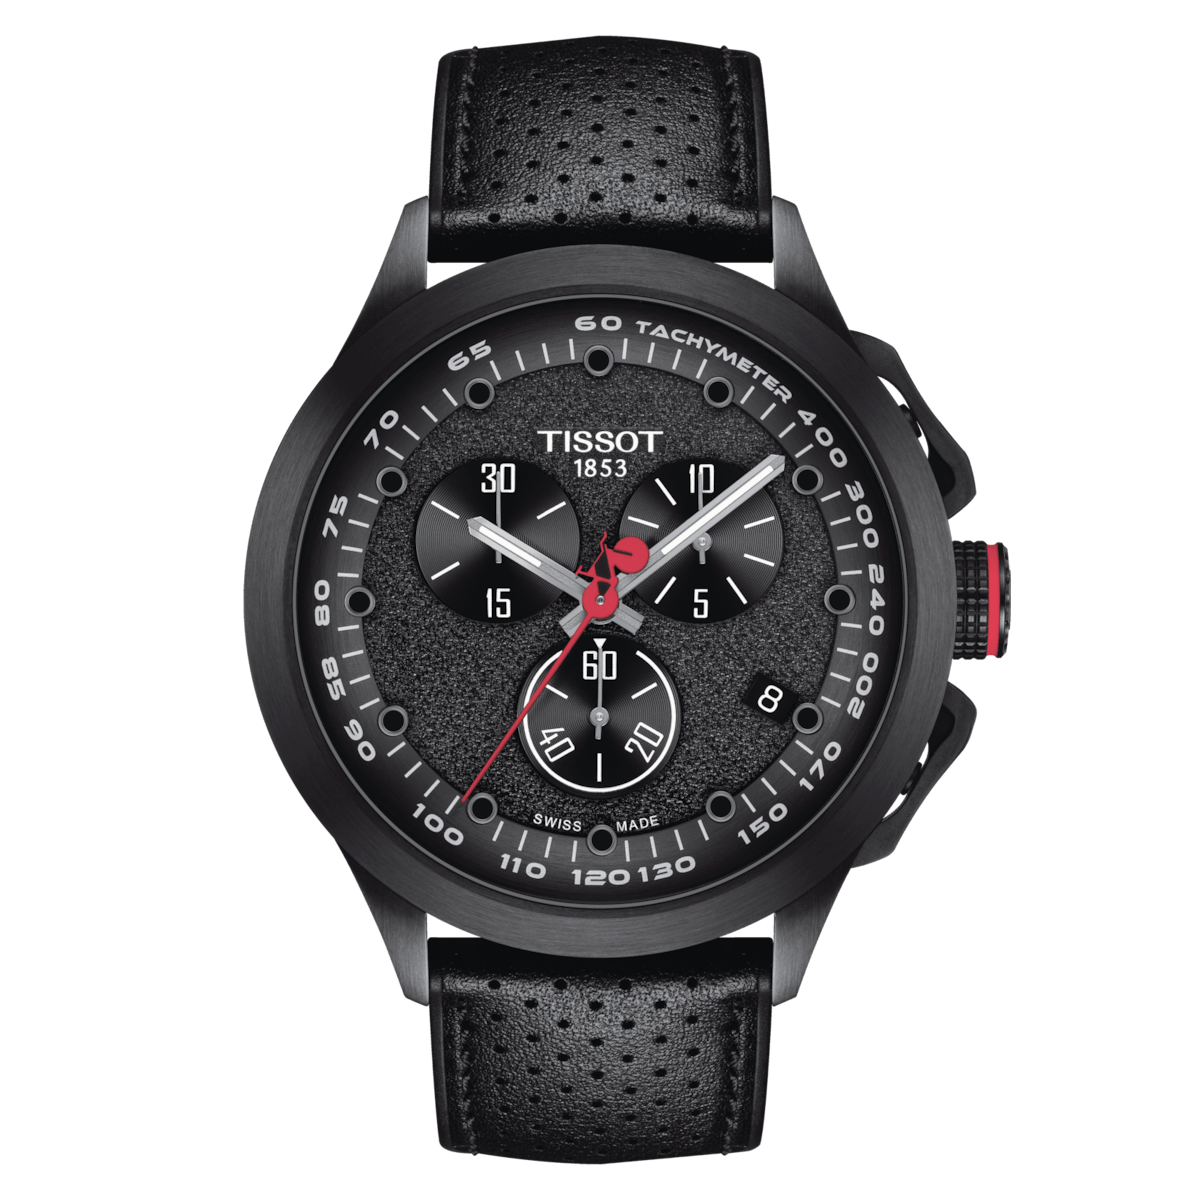 Tissot T-Race Cycling Giro d'Italia 2022 Special Edition - T135.417.37.051.01